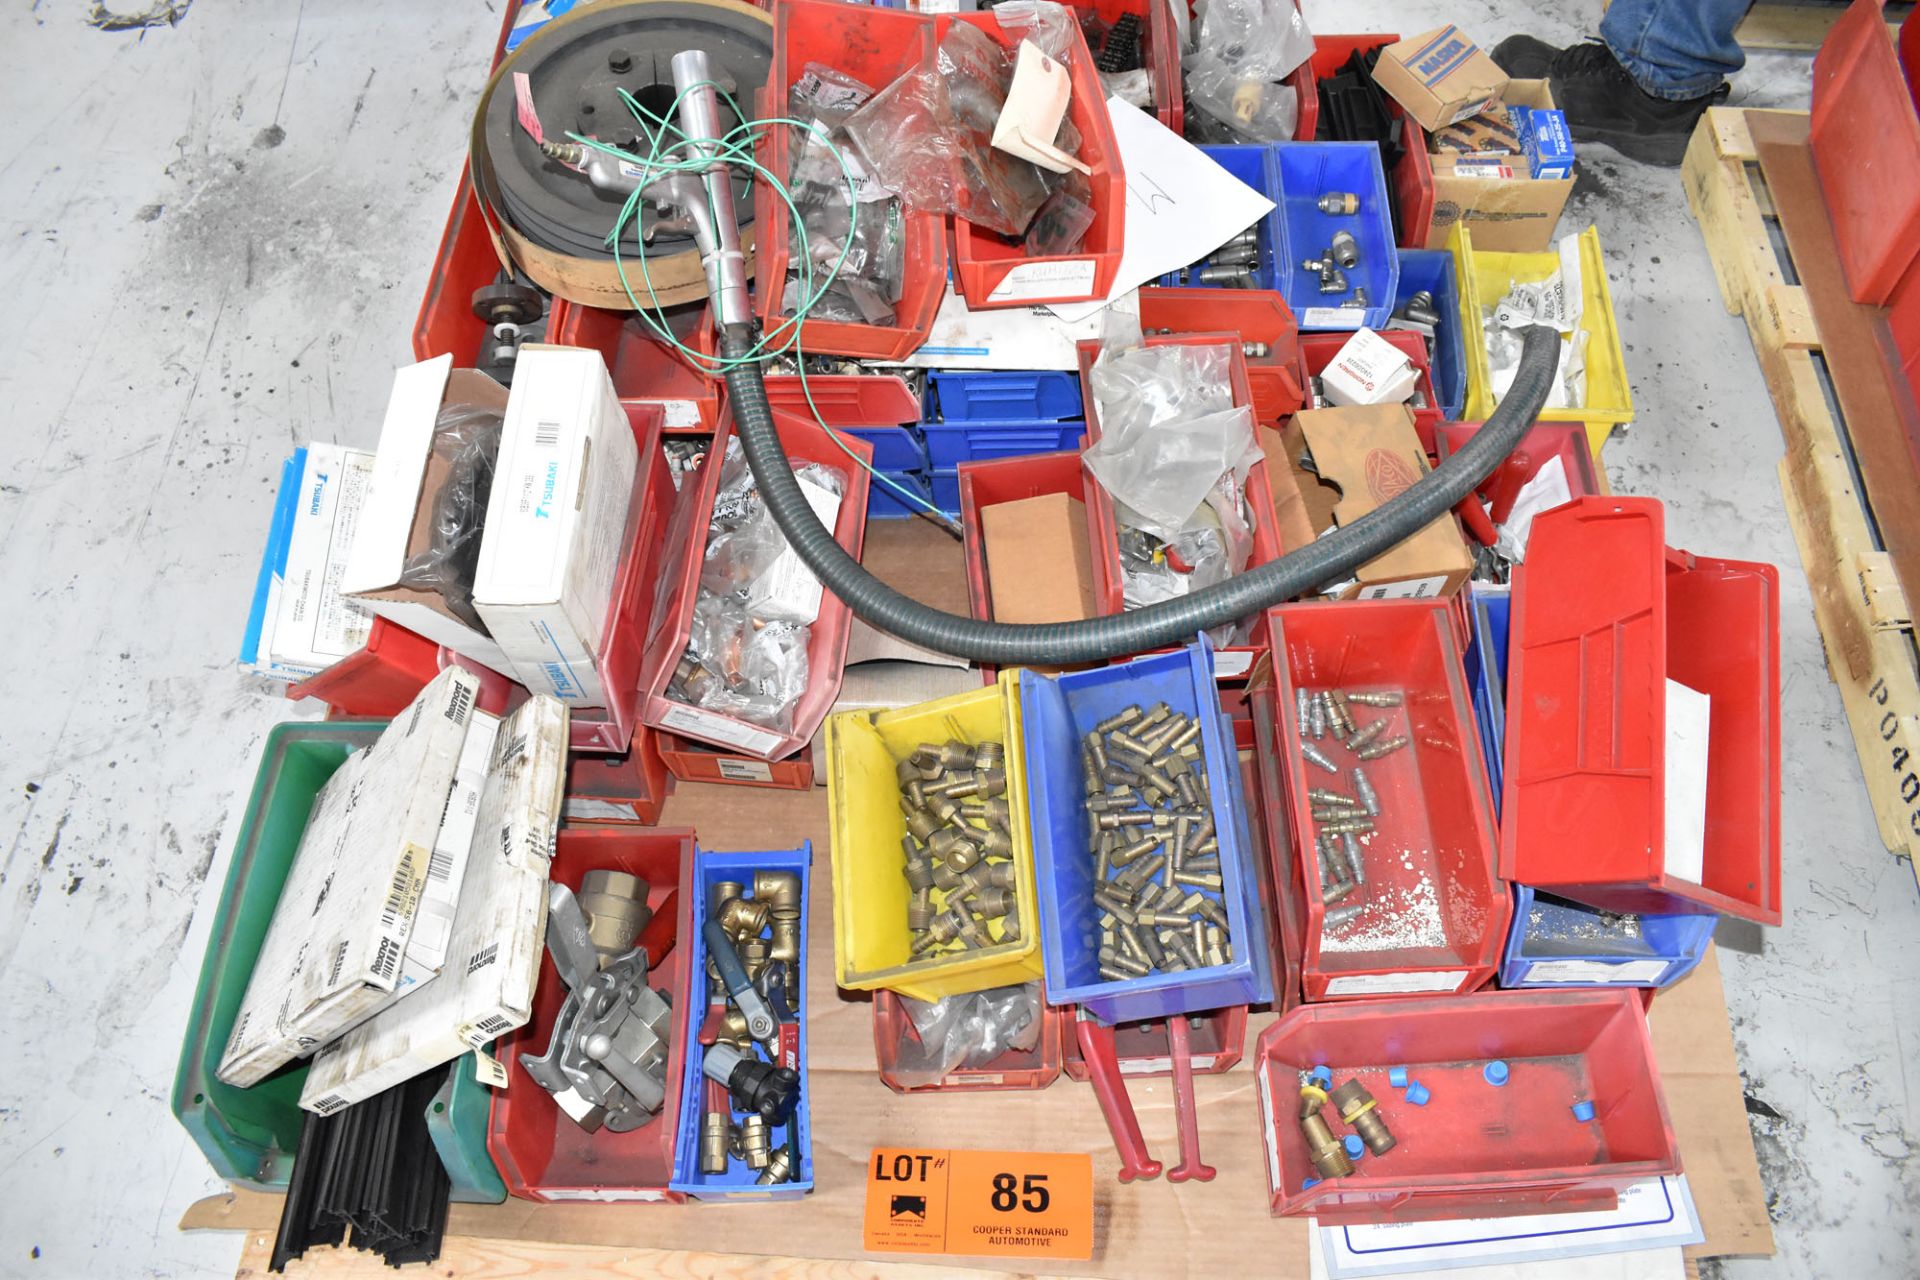 LOT/ PALLET WITH CONTENTS CONSISTING OF HARDWARE, FITTINGS, AND EXTRUDER LINE COMPONENTS [RIGGING